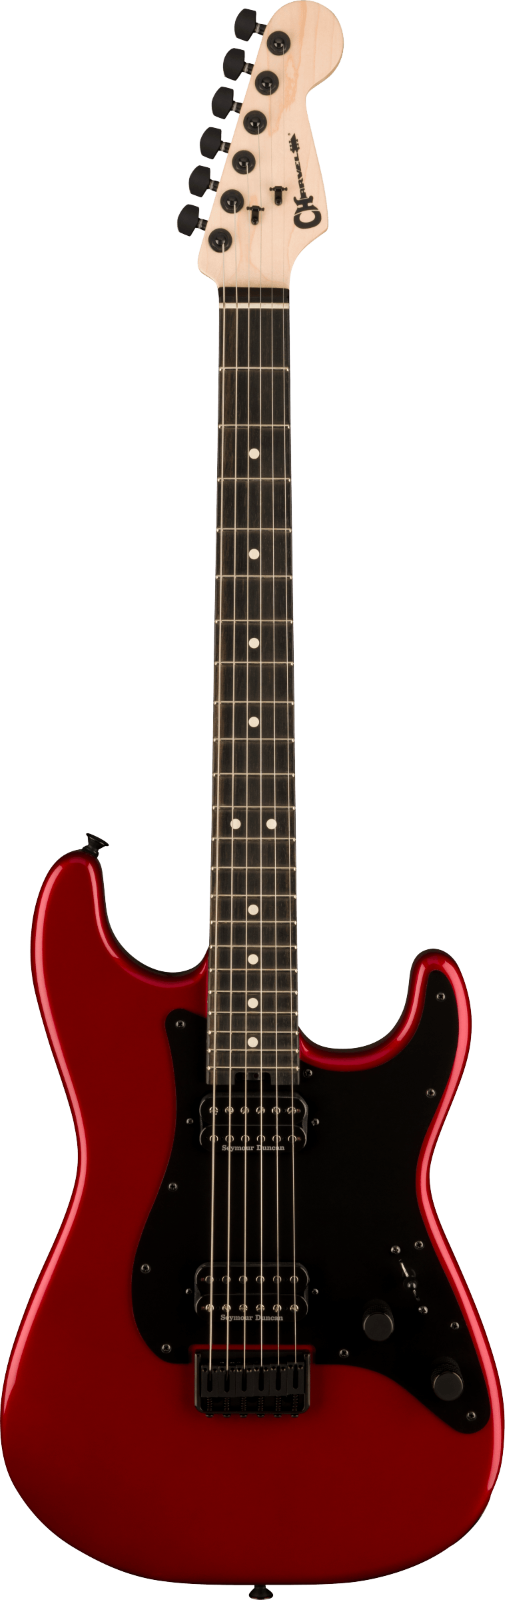 Charvel Pro-Mod So-Cal Style 1 HH HT E, Ebony Fingerboard, Candy Apple Red : photo 1